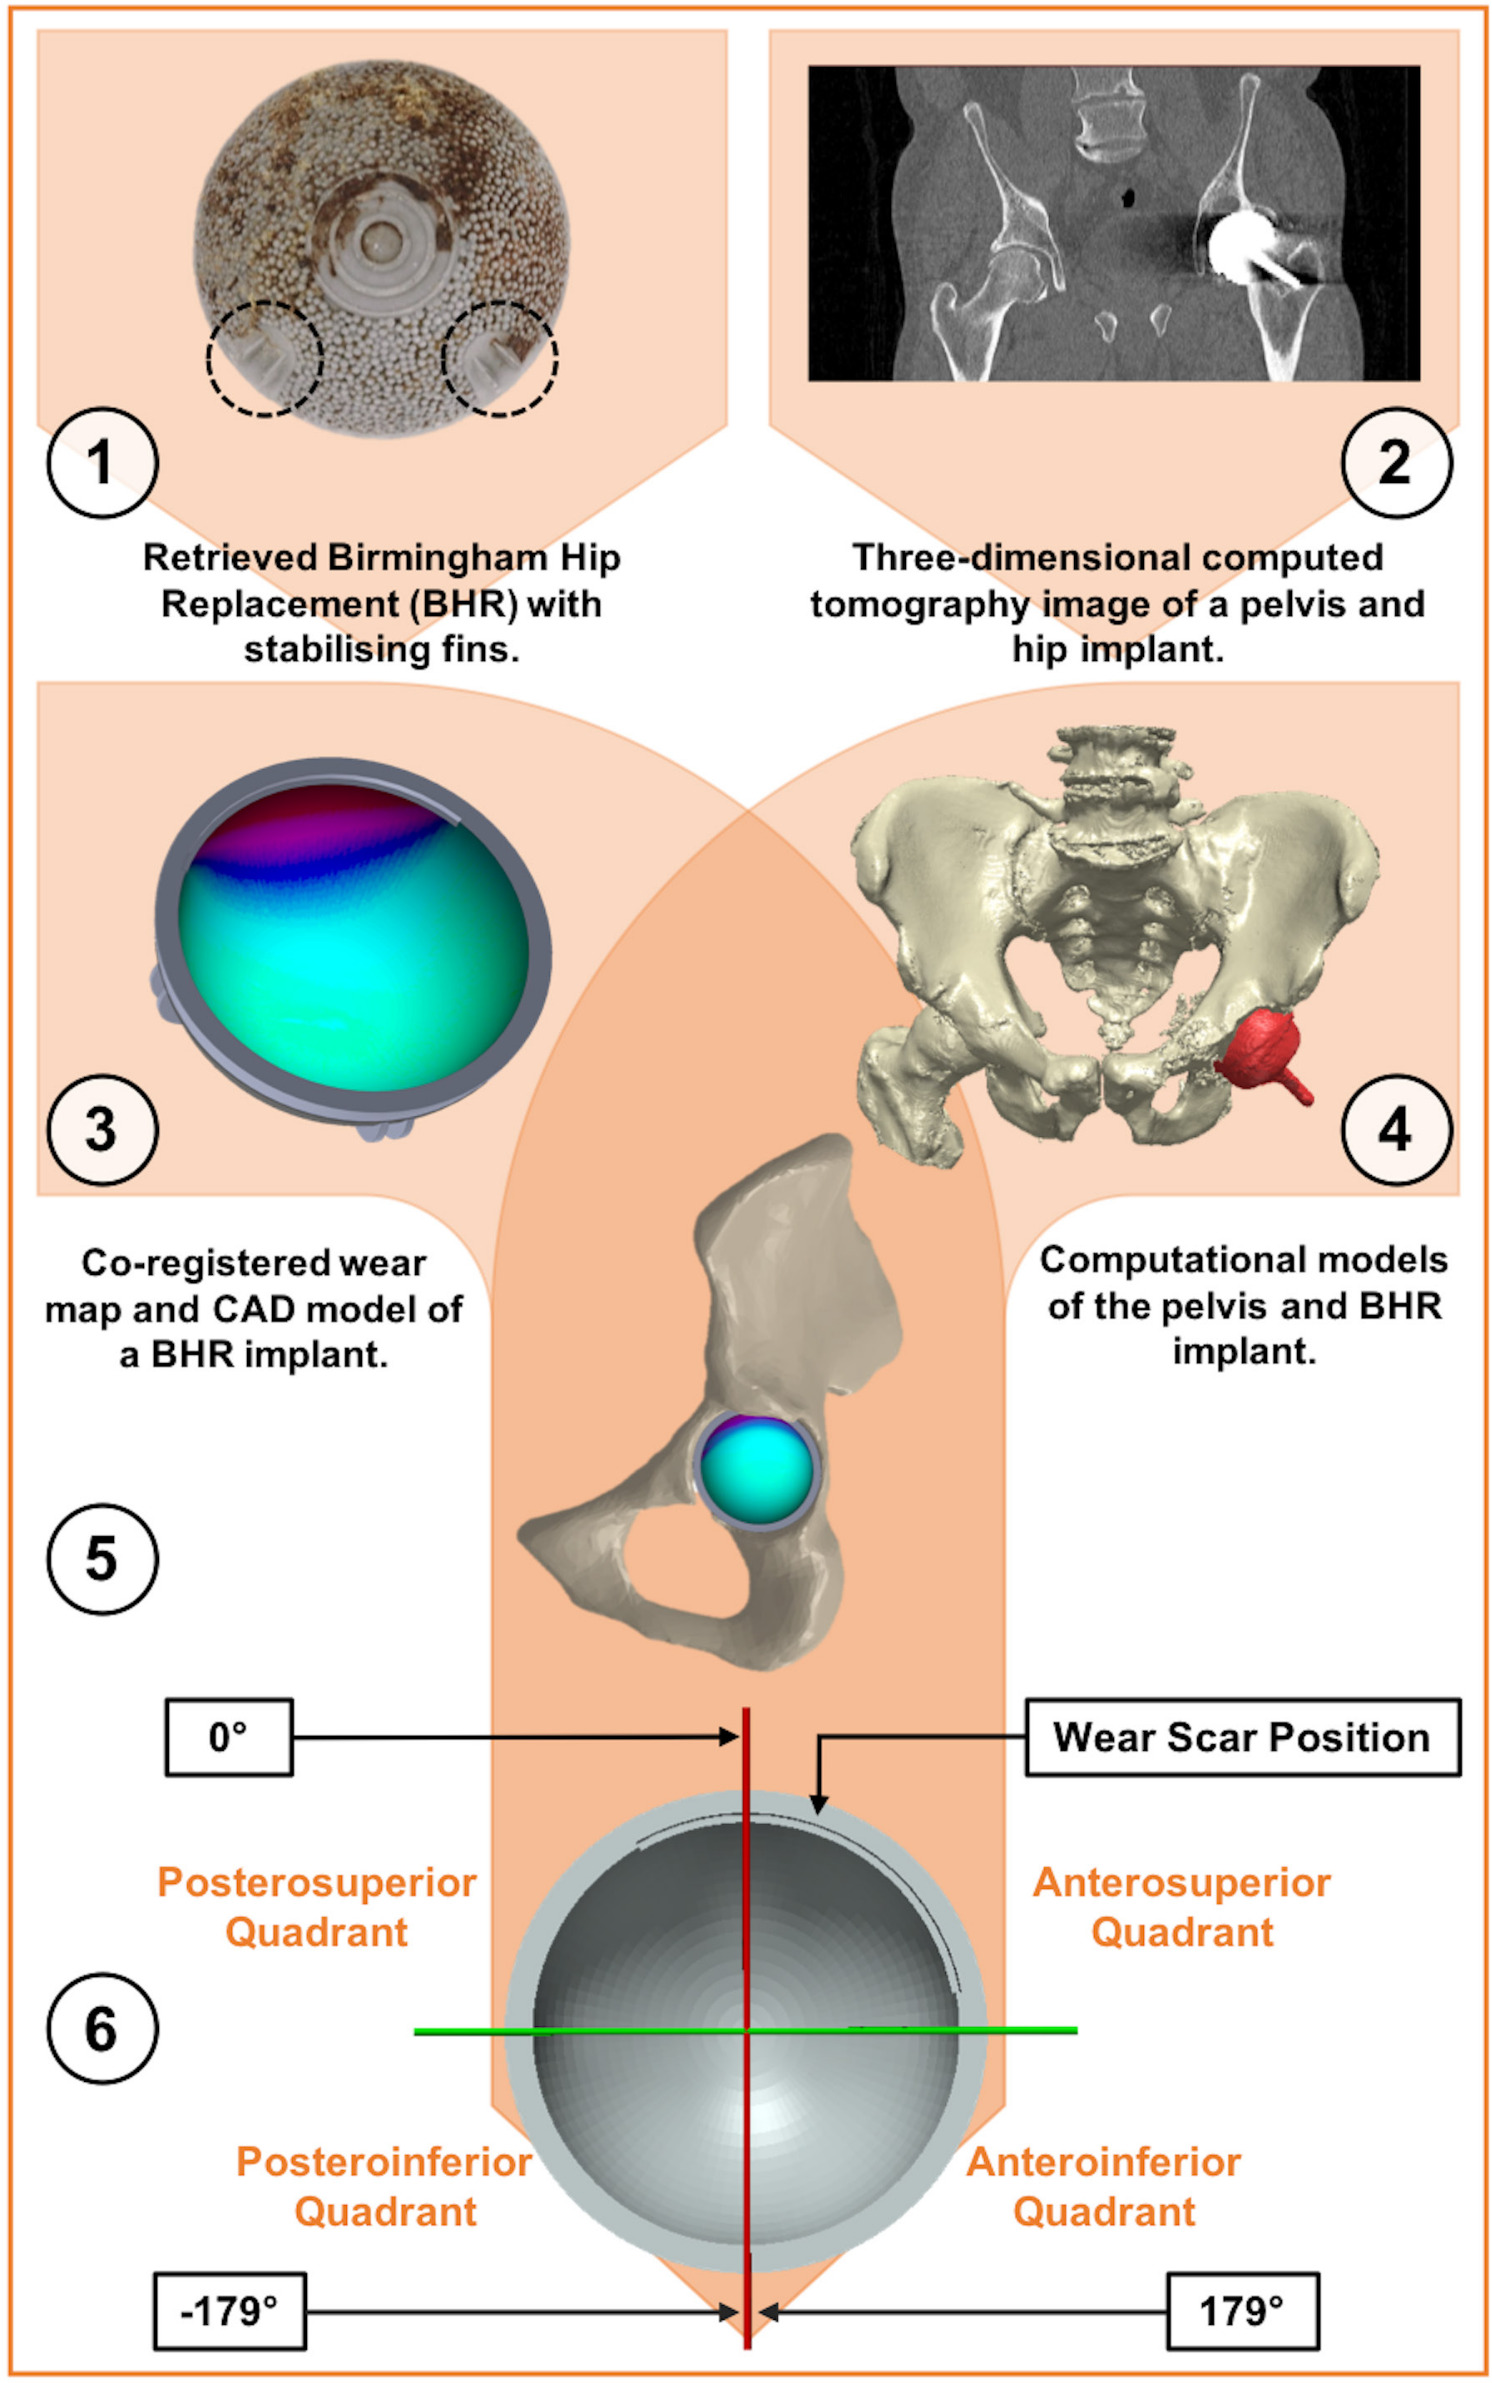 Fig. 3 
            A schematic diagram depicting the process of locating acetabular edge-wear in vivo. 1) A macroscopic image of a retrieved Birmingham acetabular component (backside), where its stabilizing fins have been circled. 2) A single slice of a pelvic CT scan, which includes a cobalt-chromium-molybdenum (CoCrMo) Birmingham hip replacement (BHR) metal implant. 3) A wear map co-registered to a BHR (52 mm) computer-aided design (CAD) model. 4) Computational models of the pelvis and BHR implant, segmented from a 3D CT scan. 5) A BHR implant CAD model and wear map, co-registered to the computational model of the actual implant within the pelvis. 6) A perpendicular view of the acetabular cup and its measurement axis, where the Cup-APP (CAPP) plane defines the 0° and 180° positions. Anterior and posterior locations of edge-wear were defined by positive and negative angles, respectively.
          